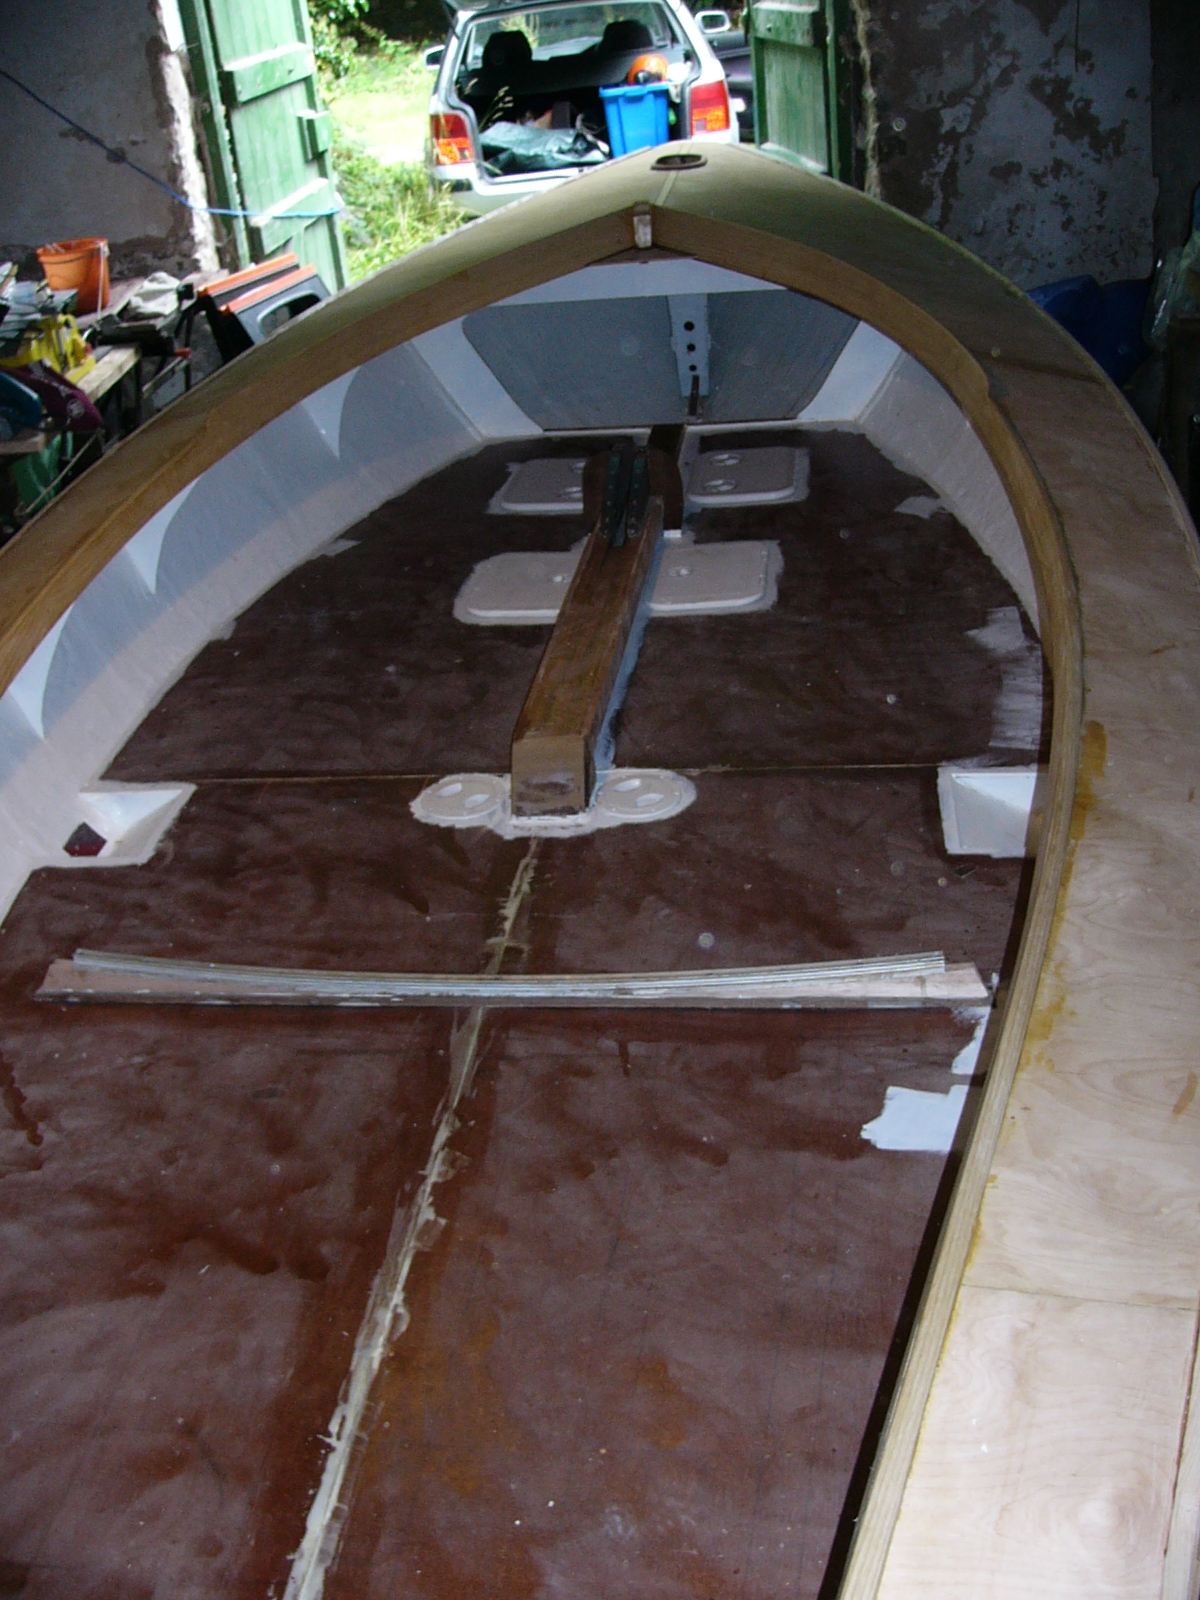 Ready for the cockpit sole to be painted